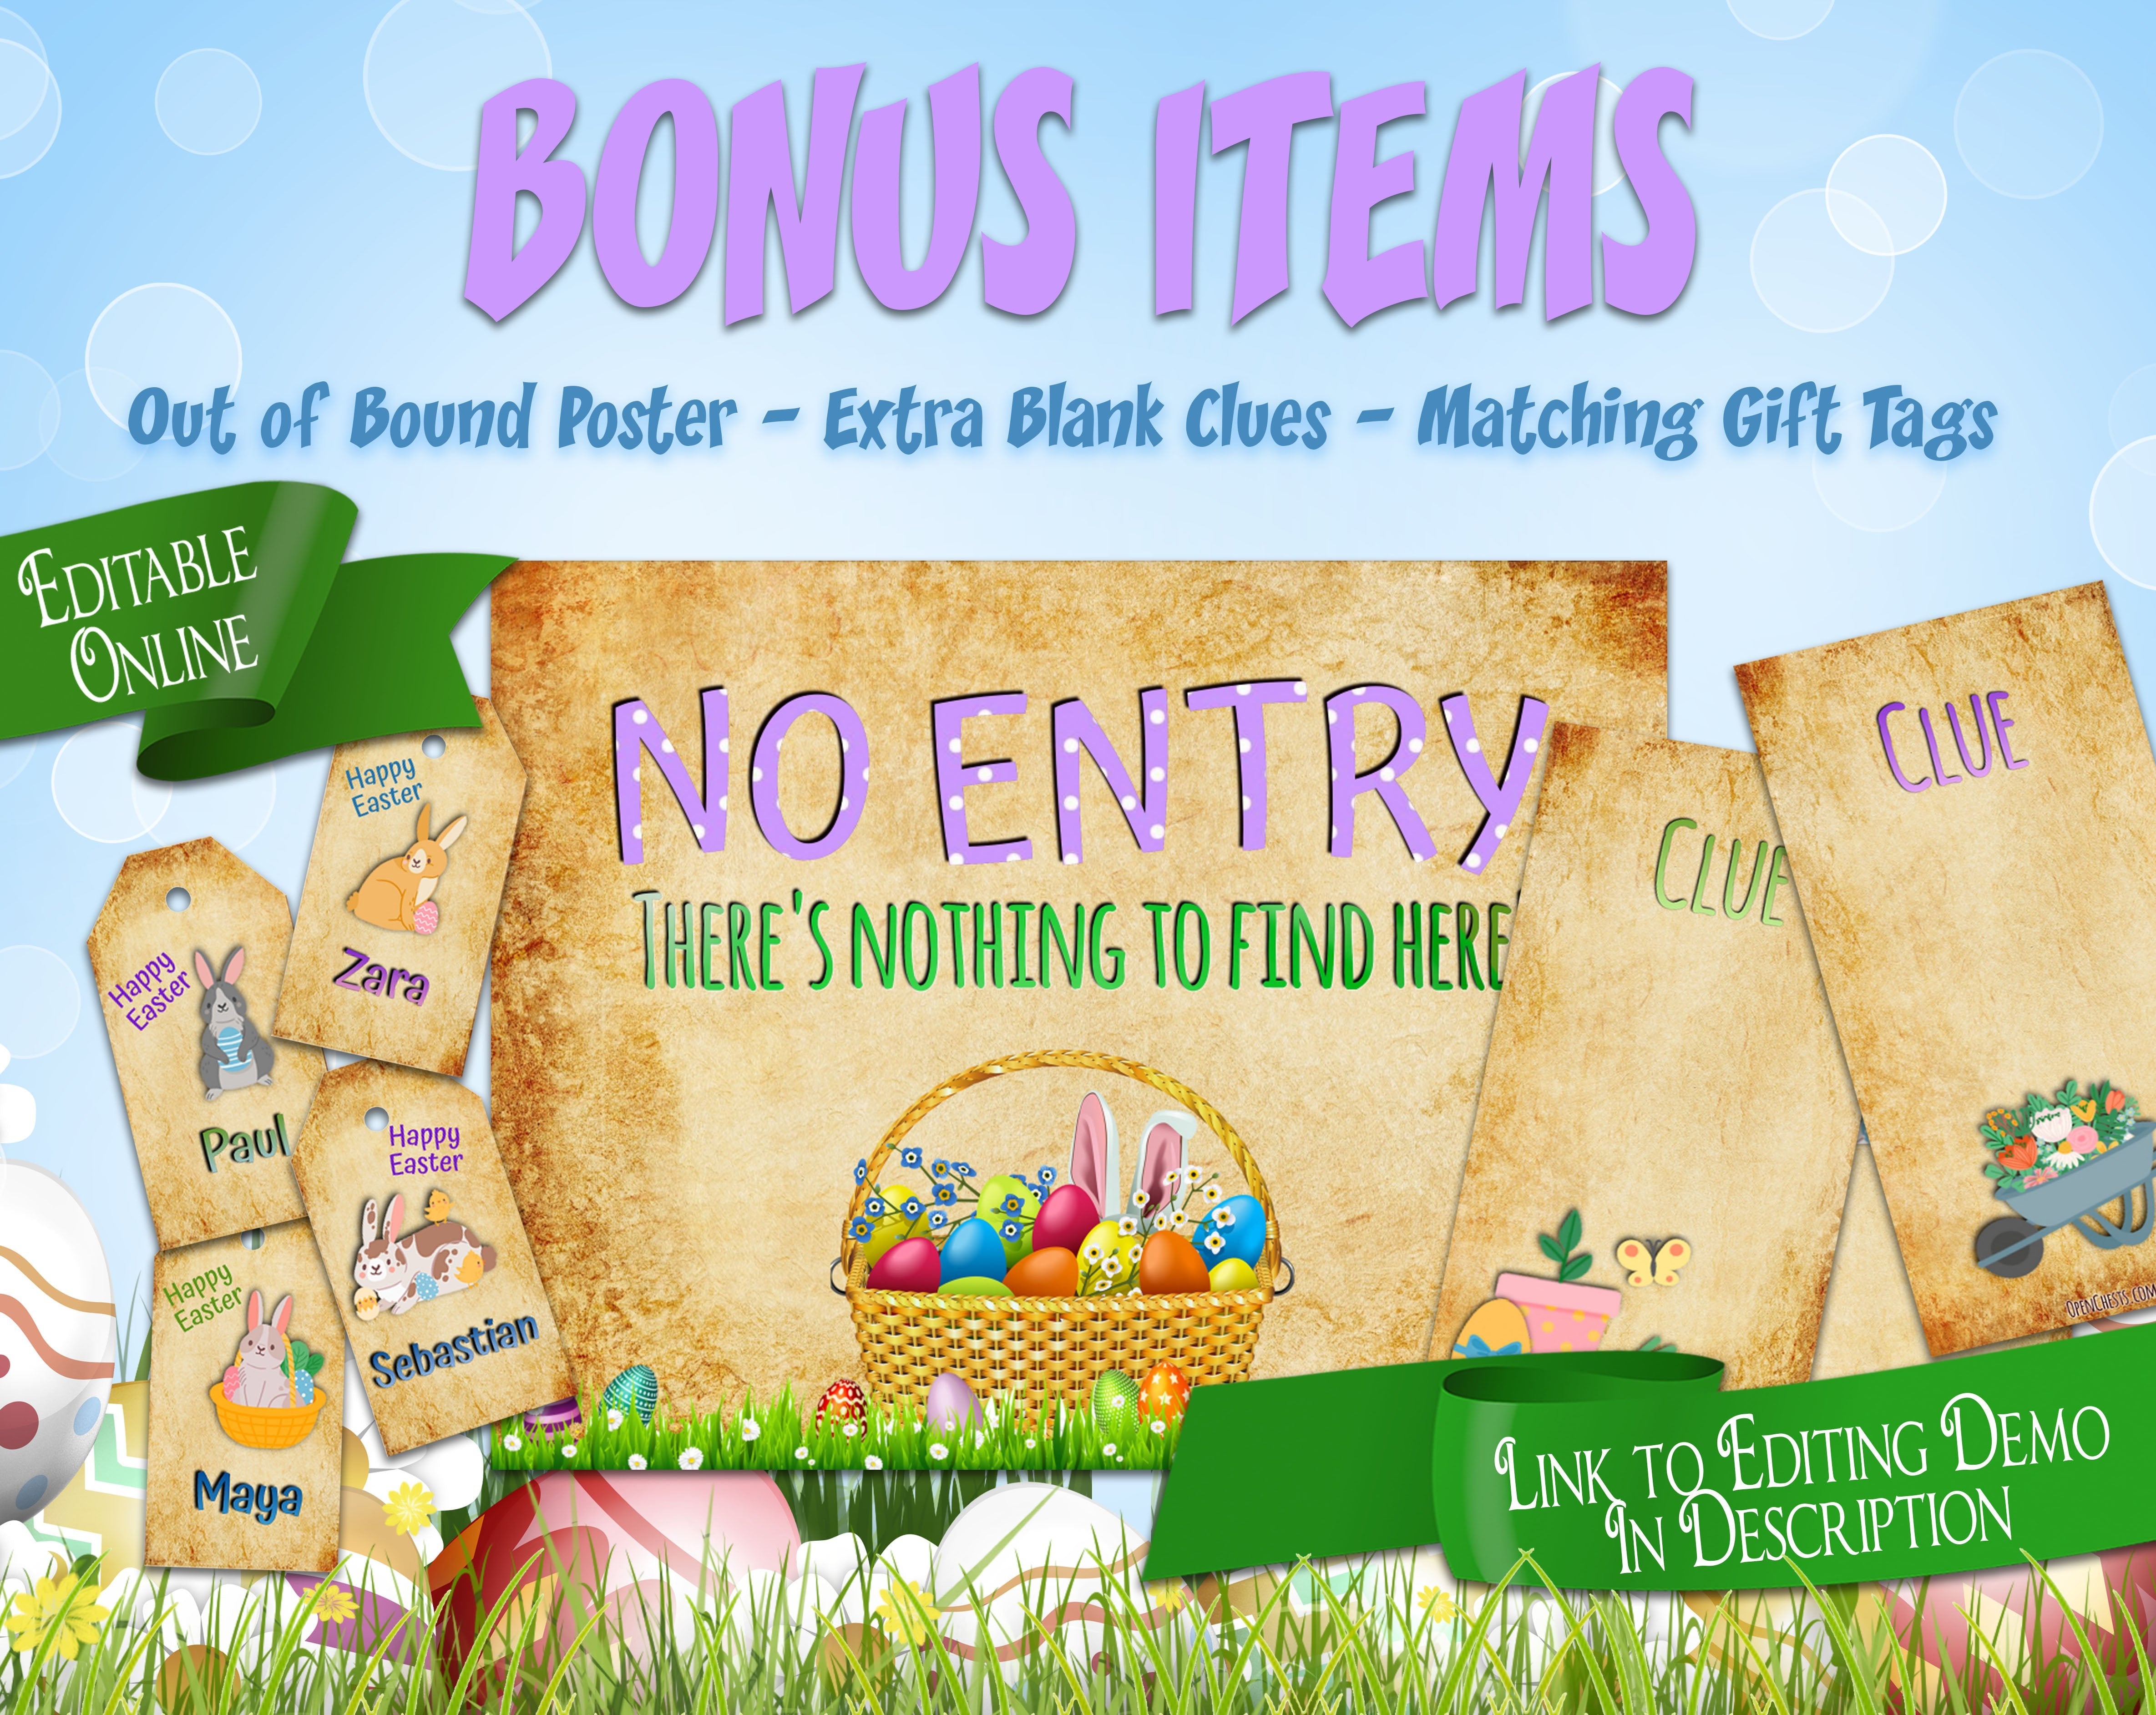 Easter Egg Hunt Puzzle Clues | Editable Treasure Hunt - Open Chests